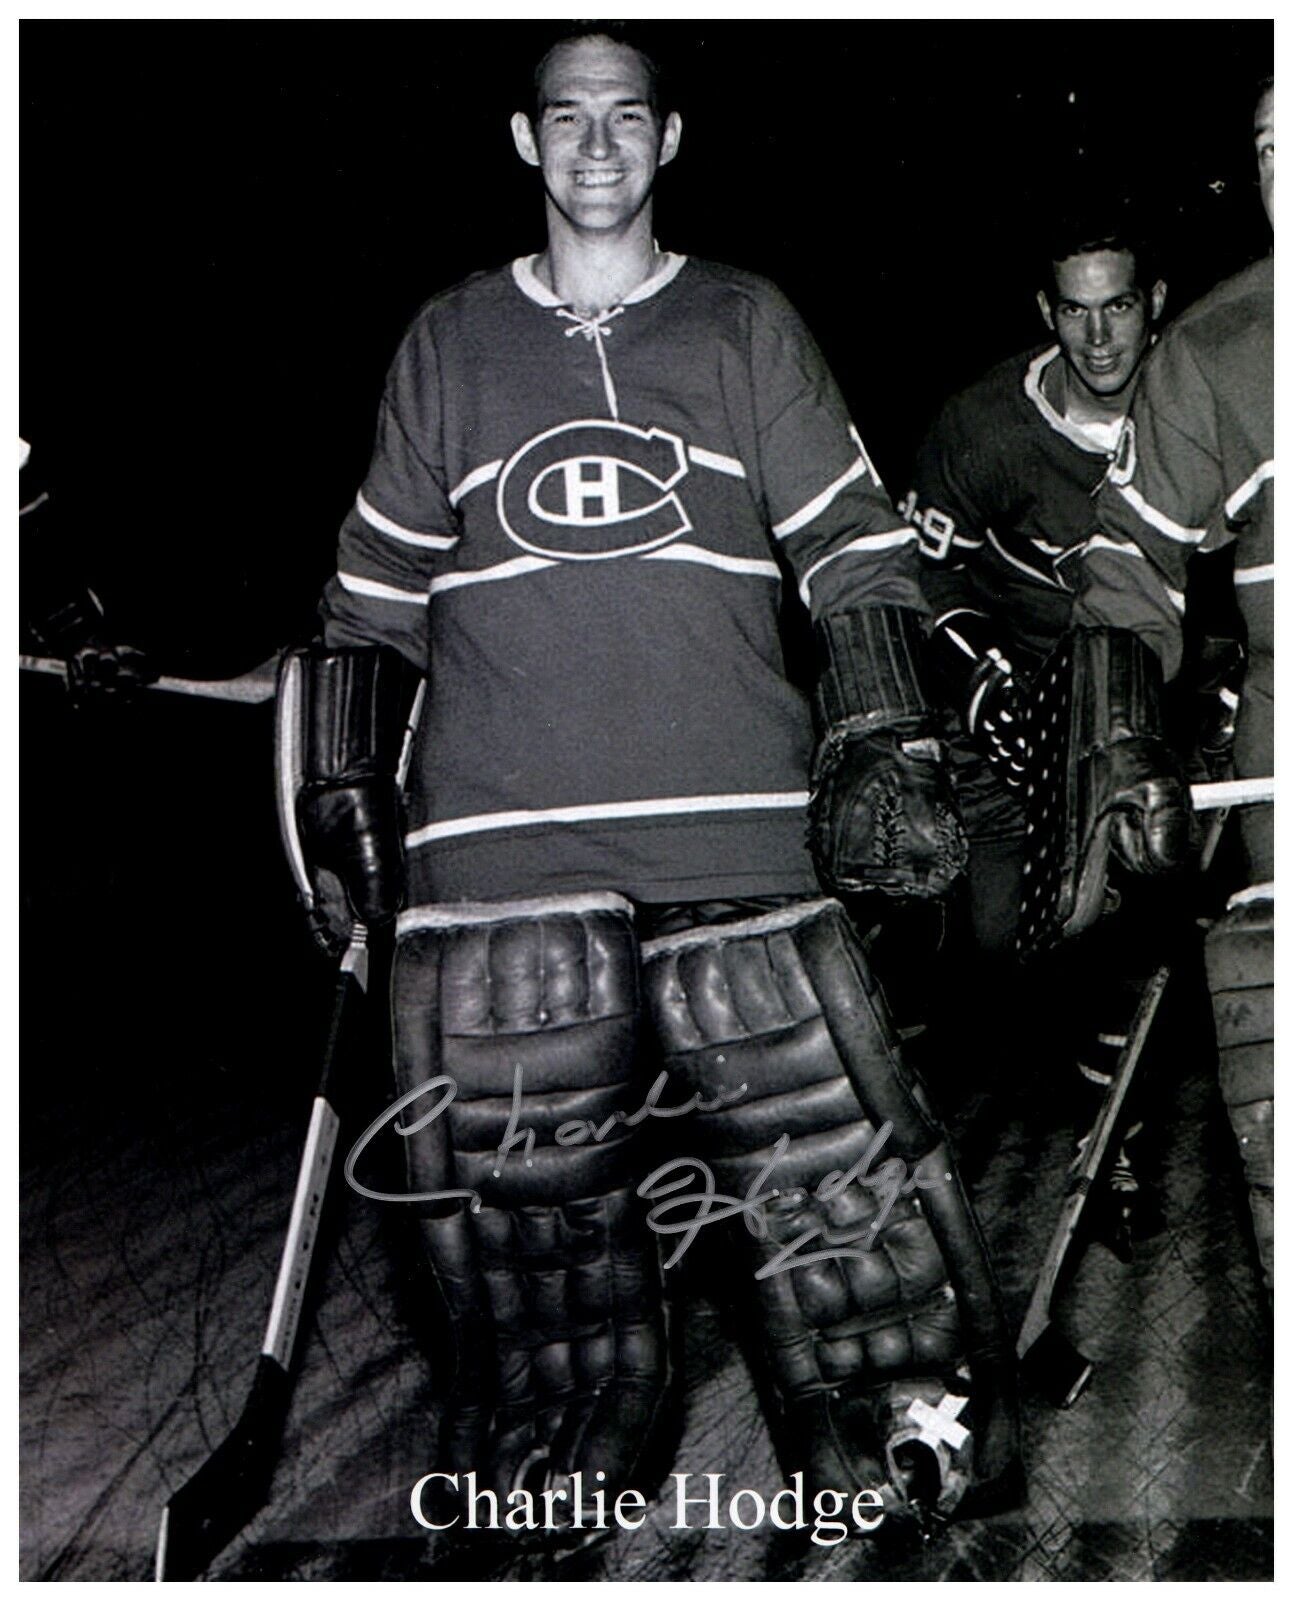 Charlie Hodge Montreal Canadiens Autographed Signed 8x10 Black & White Photo